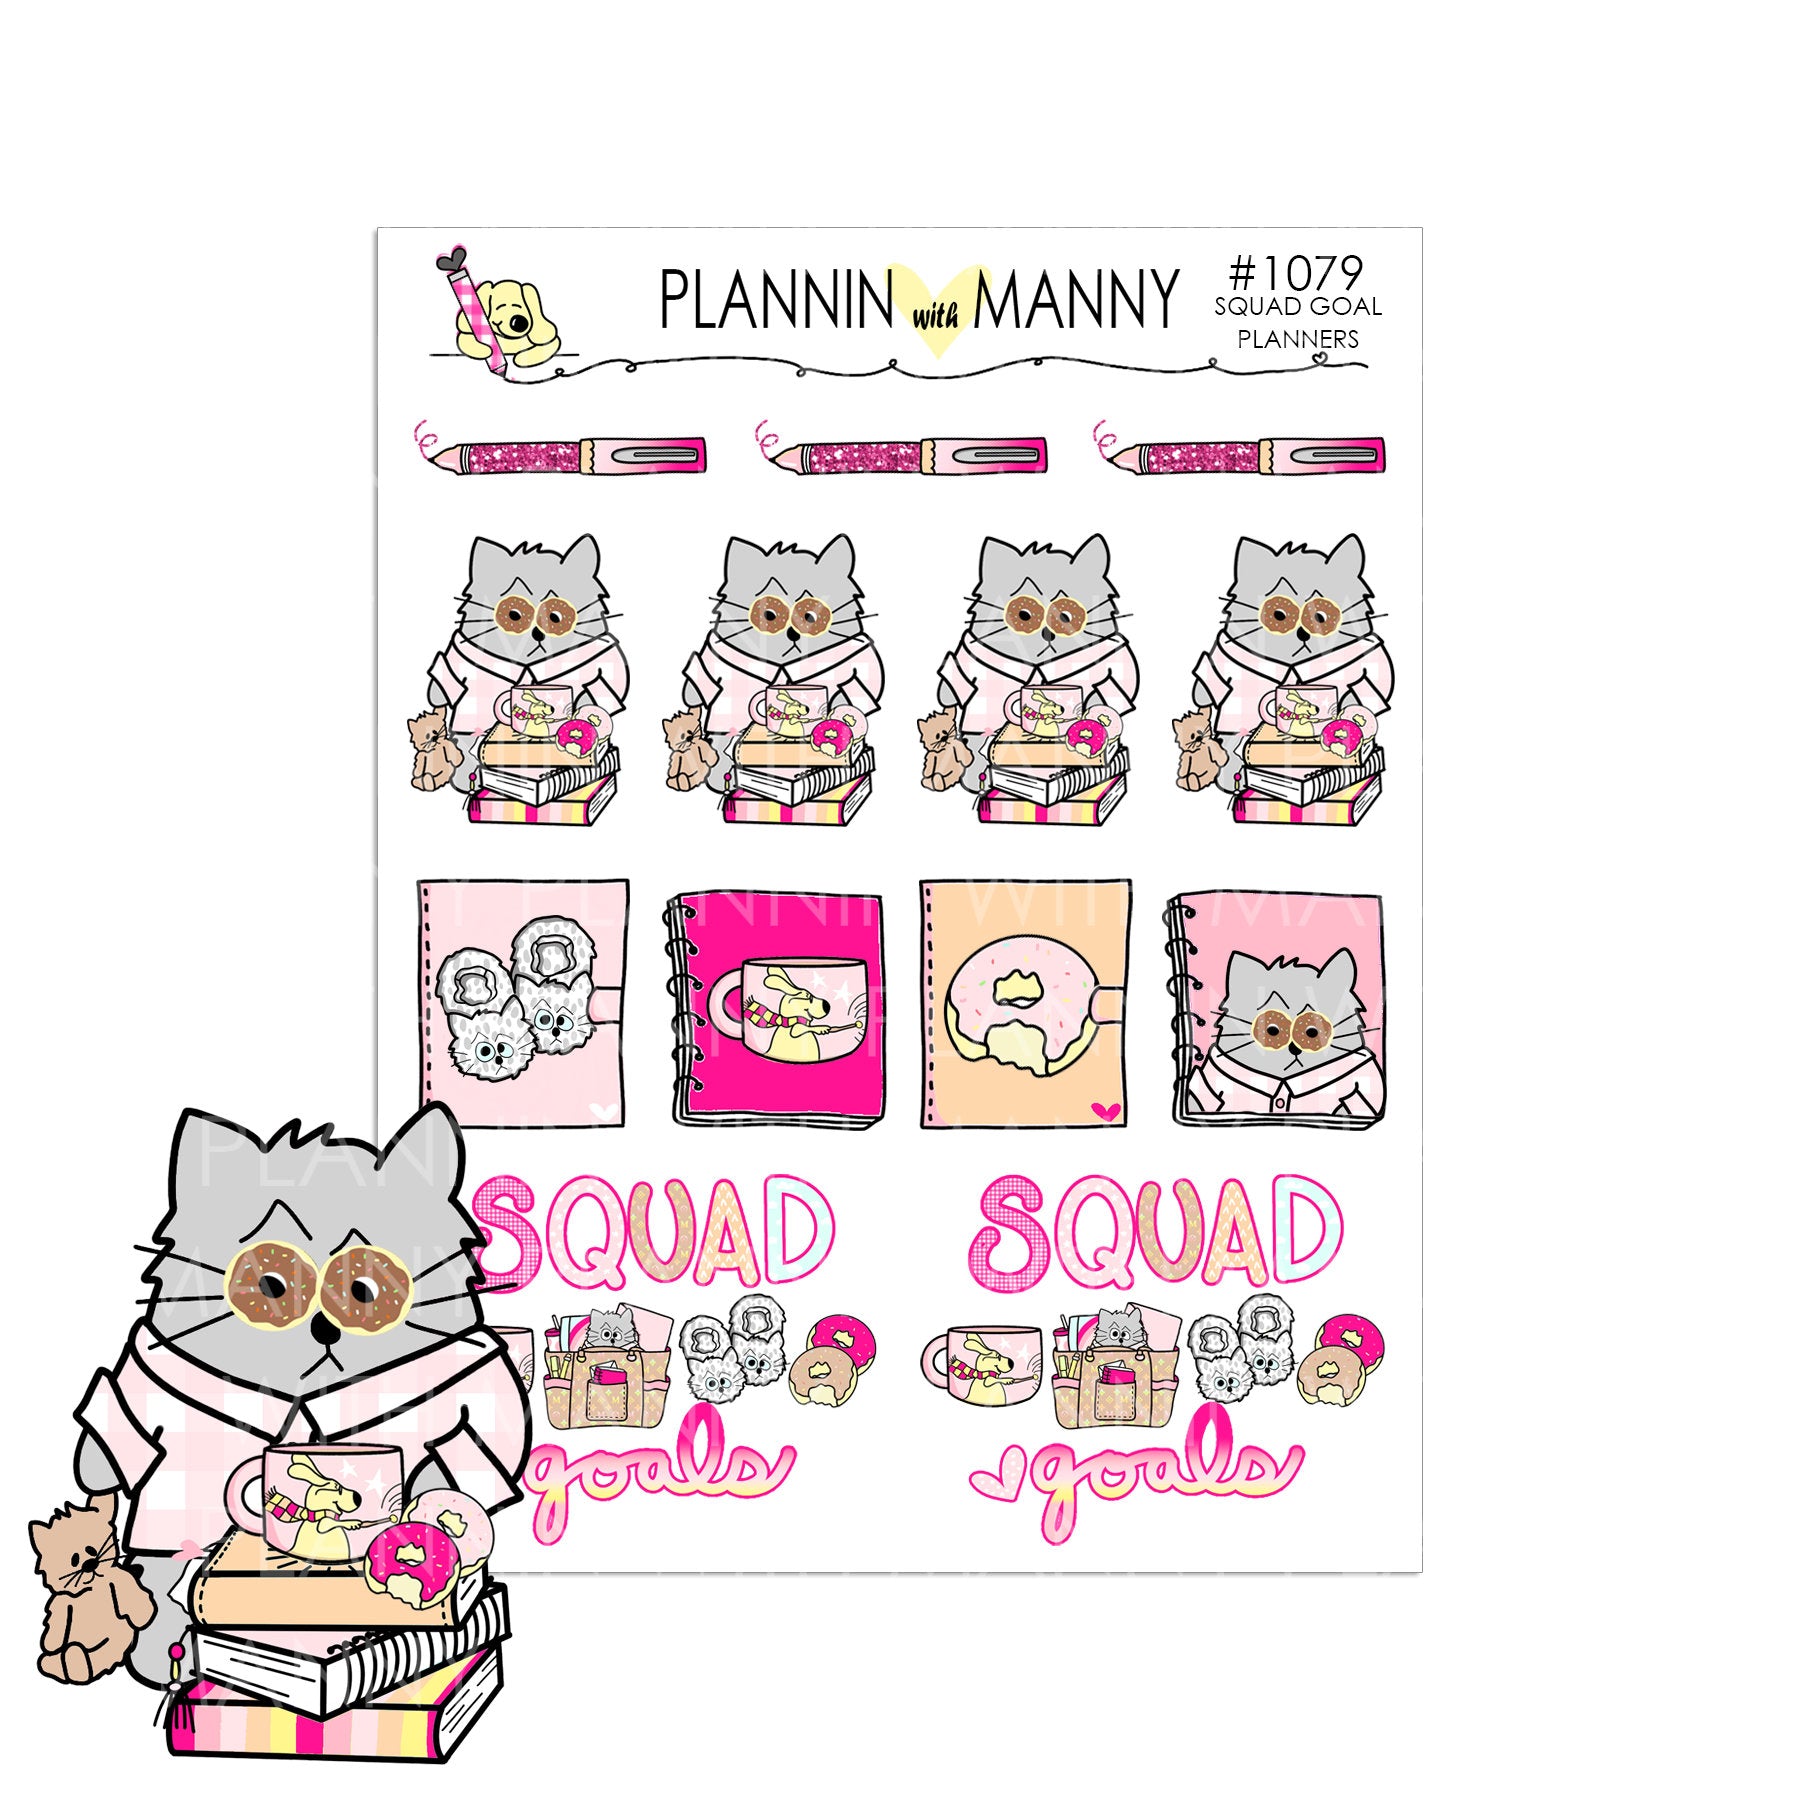 1079 SQUAD GOAL PLANNER Stickers - Squad Goals Collection